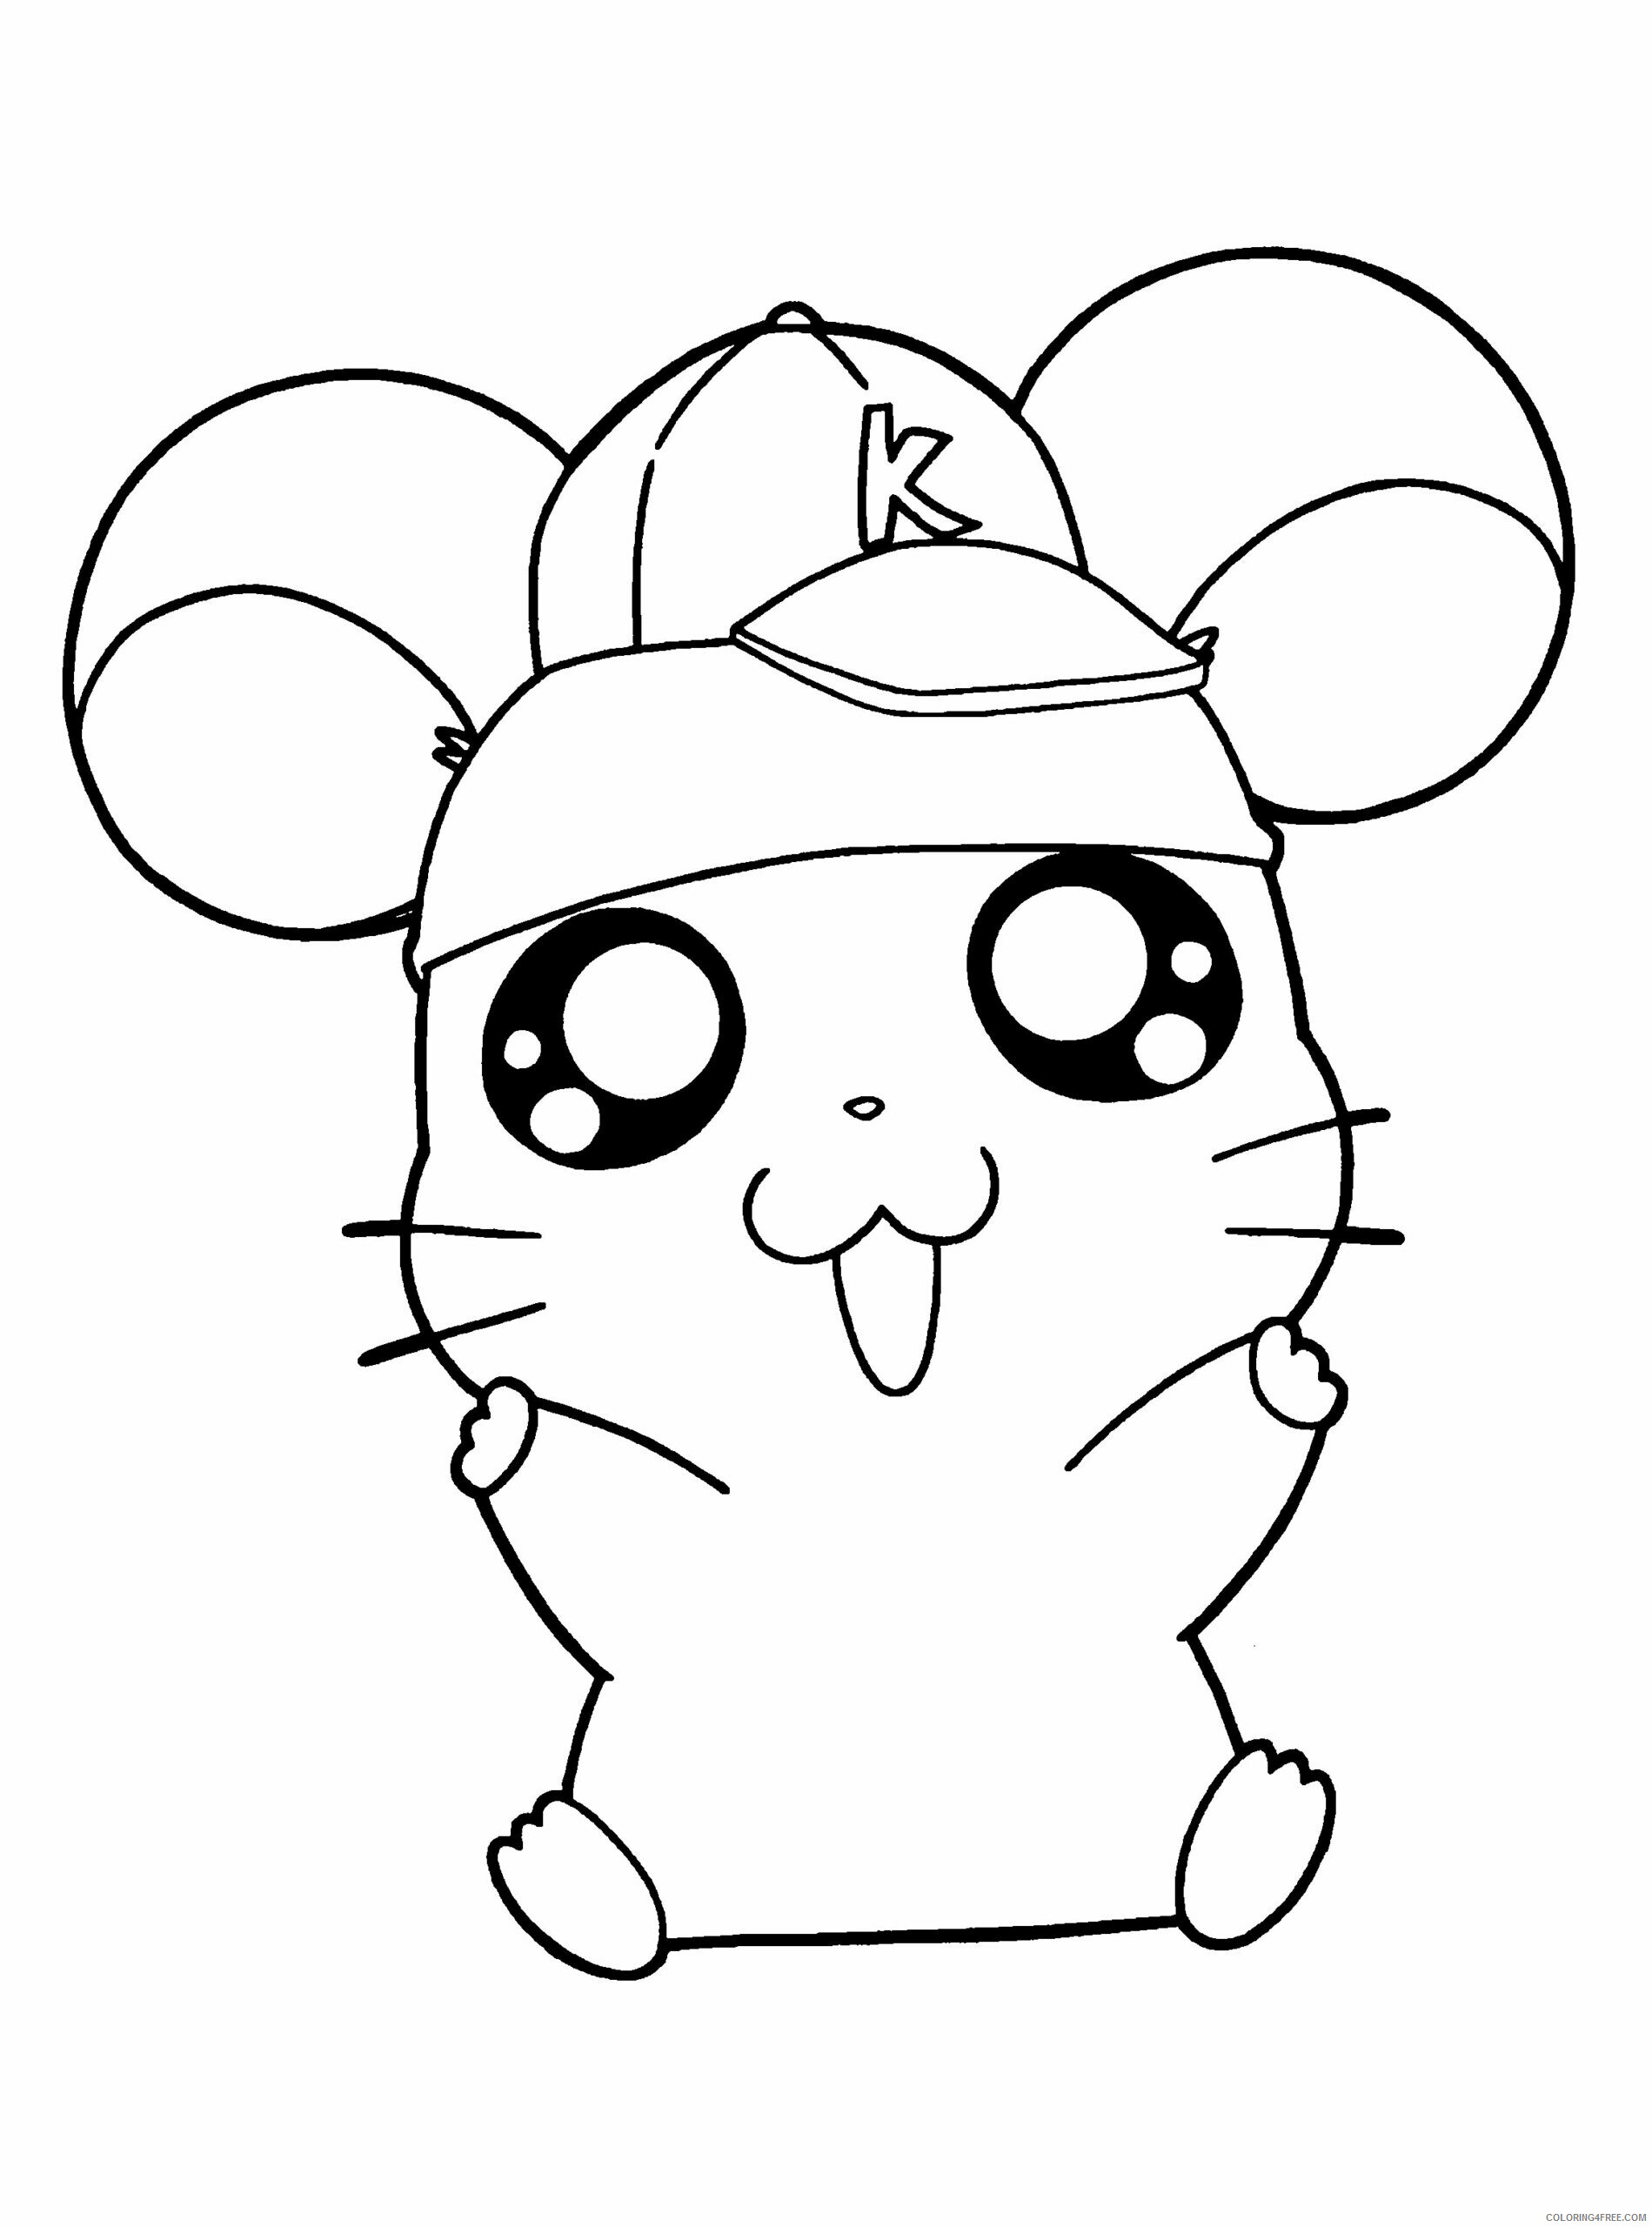 Hamster Coloring Sheets Animal Coloring Pages Printable 2021 2275 Coloring4free